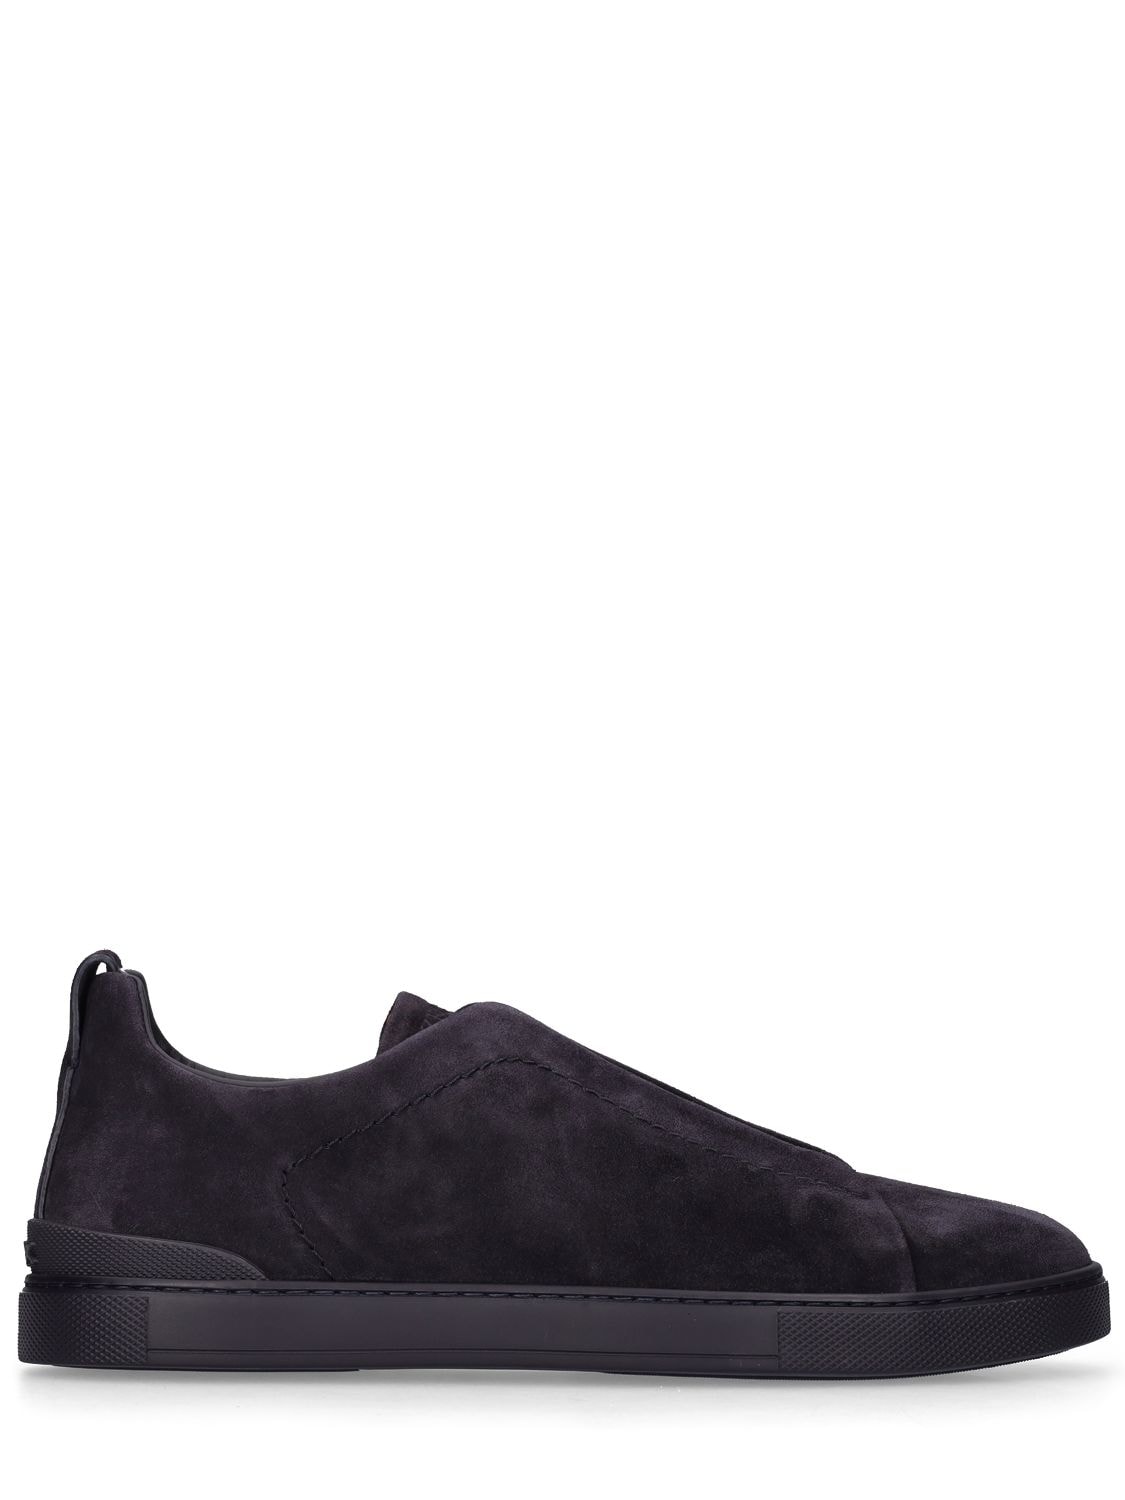 ZEGNA Triple Stitch Leather Low-top Sneakers